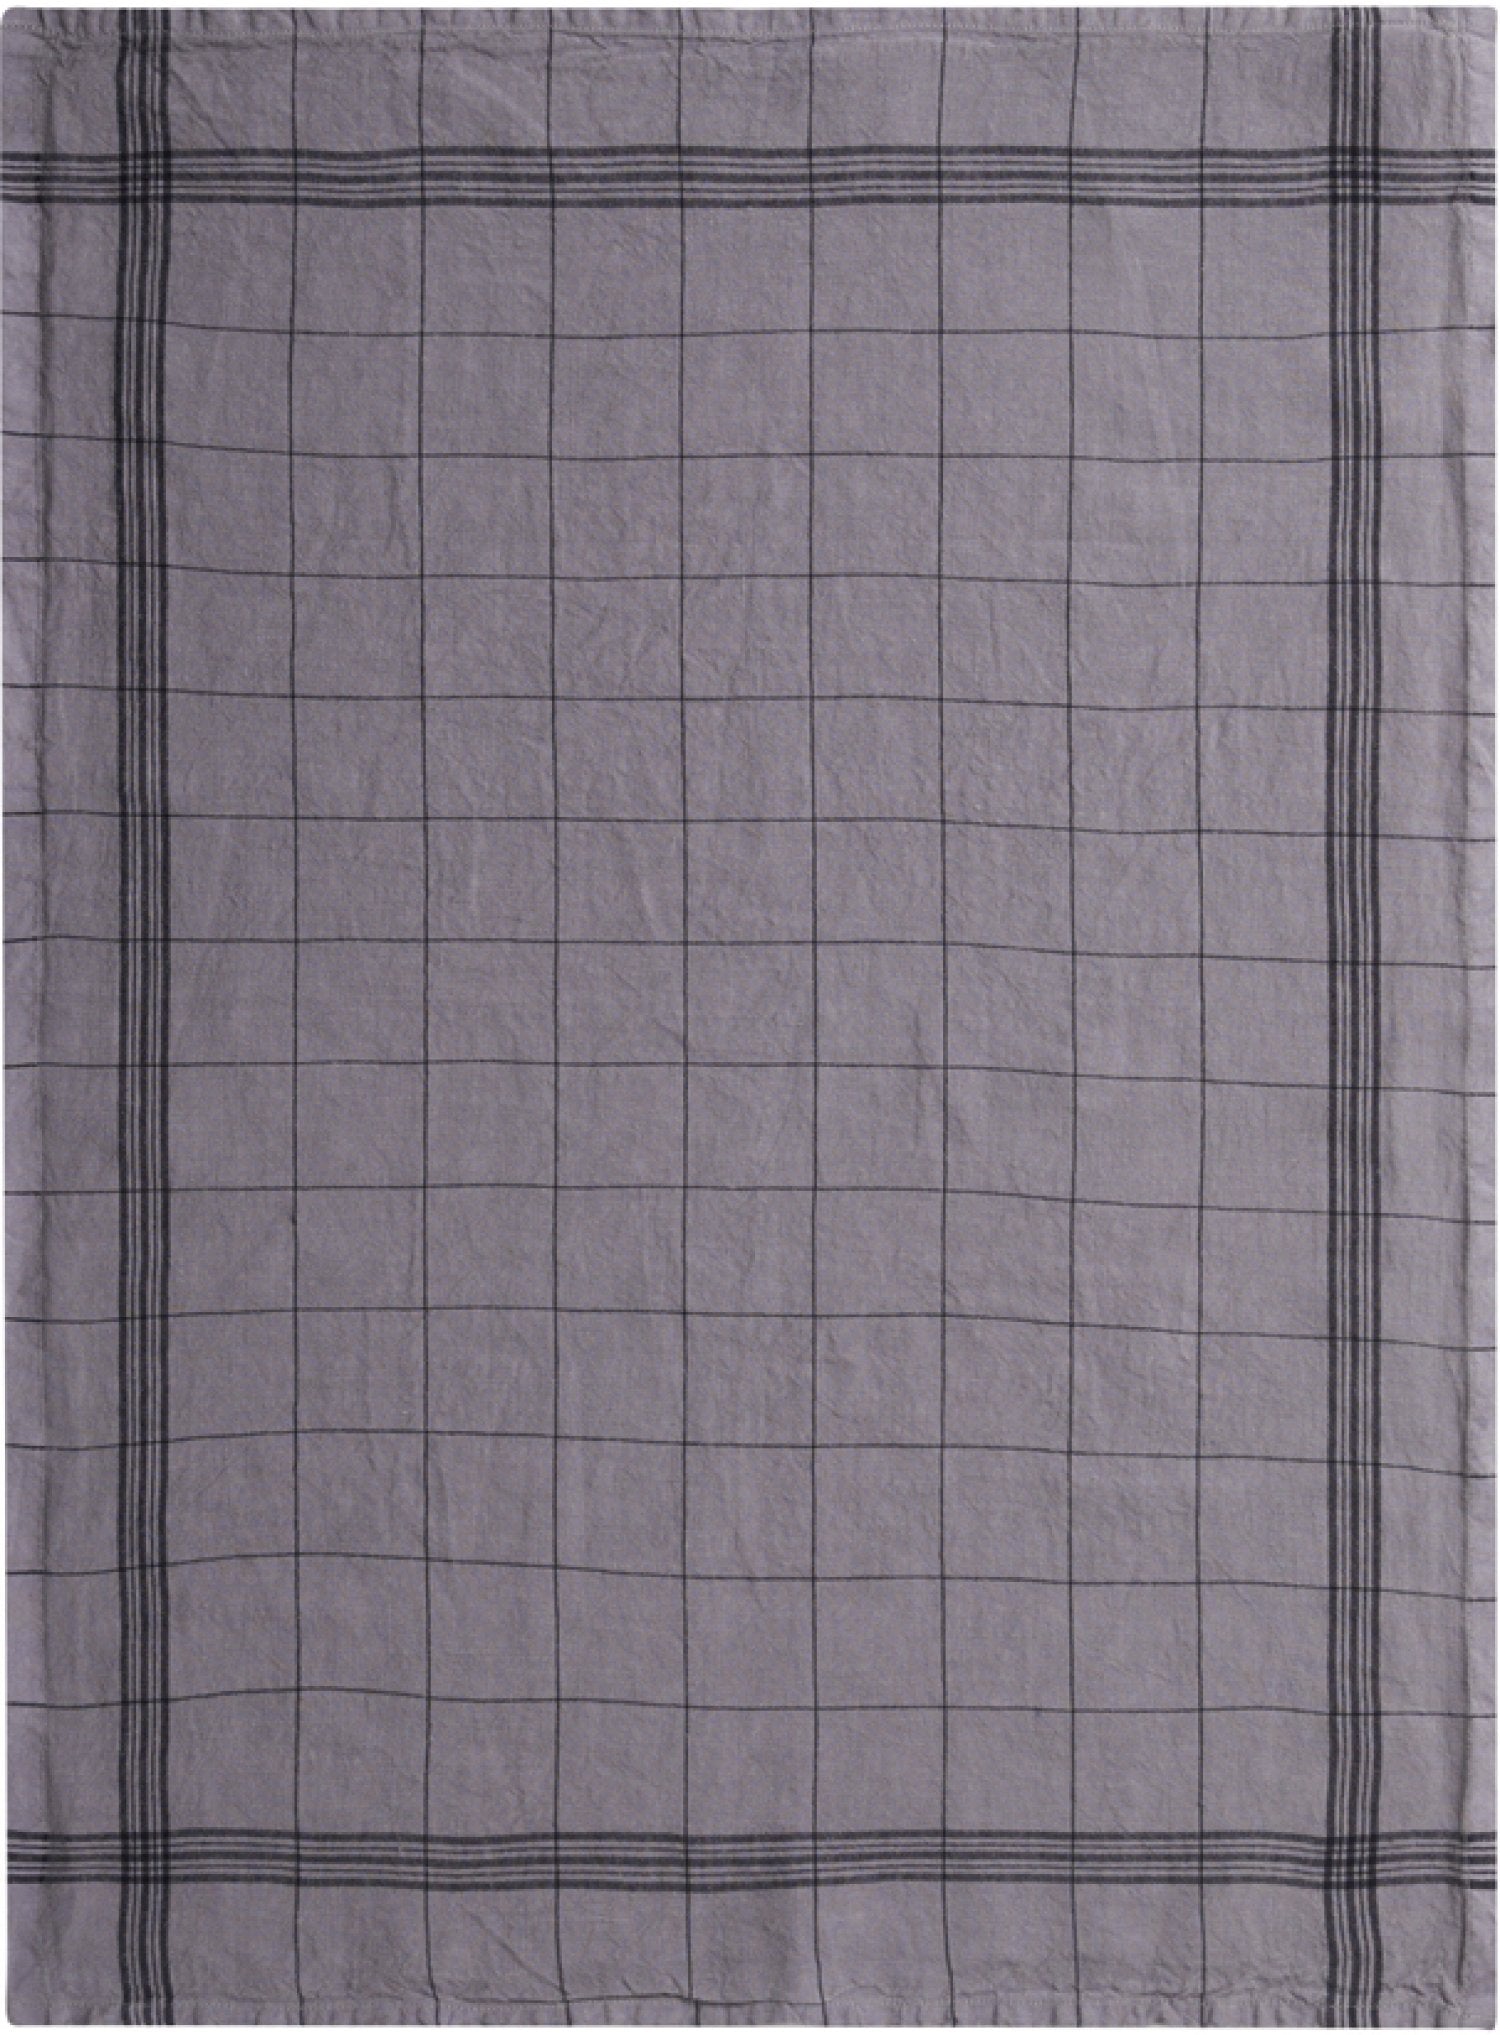 Charvet Editions "Bistro" (Breton), Natural woven linen tea towel. Made in France.